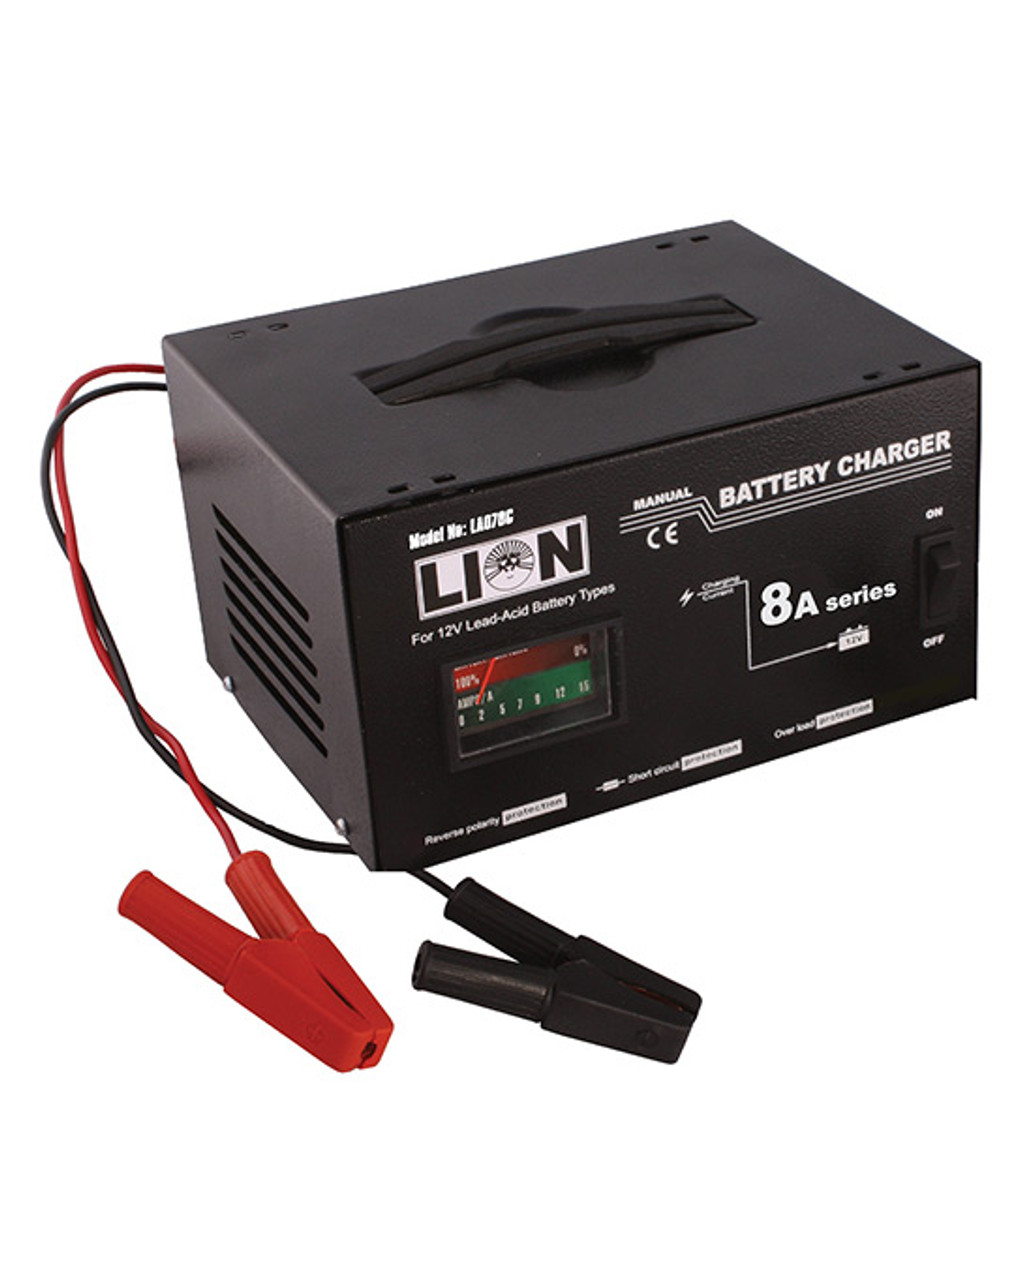 Lion Battery Charger. Green Lion зарядка авто. Lion Battery 18в. Lion Battery Charger tns30w168100.